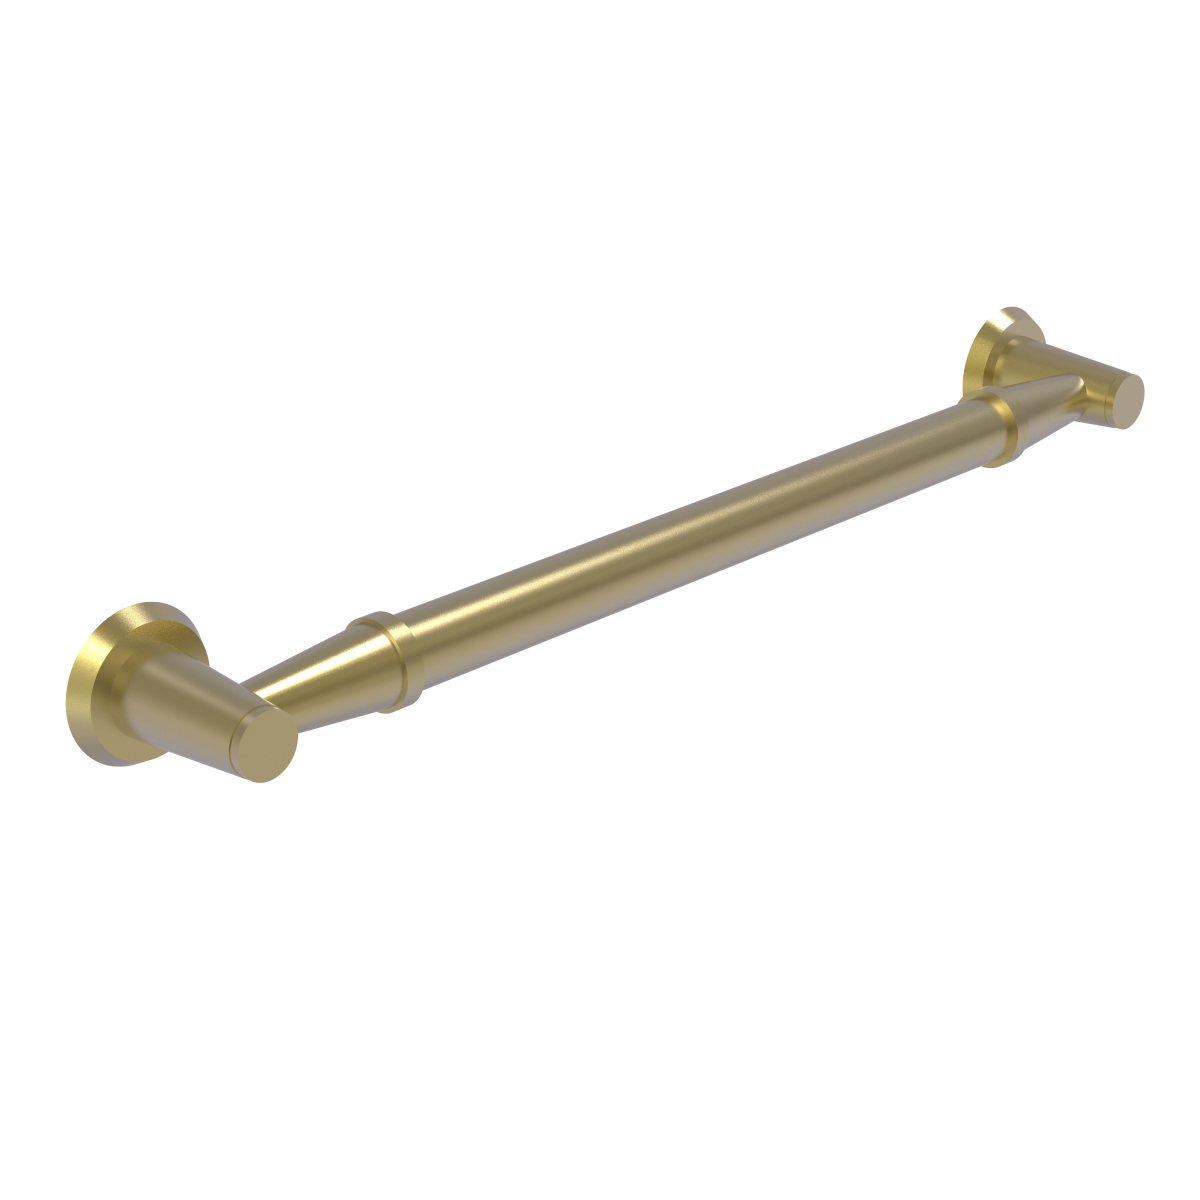 Picture of Allied Brass MD-GRS-16-SBR 16 in. Grab Bar Smooth, Satin Brass - 16 x 3.5 x 18 in.